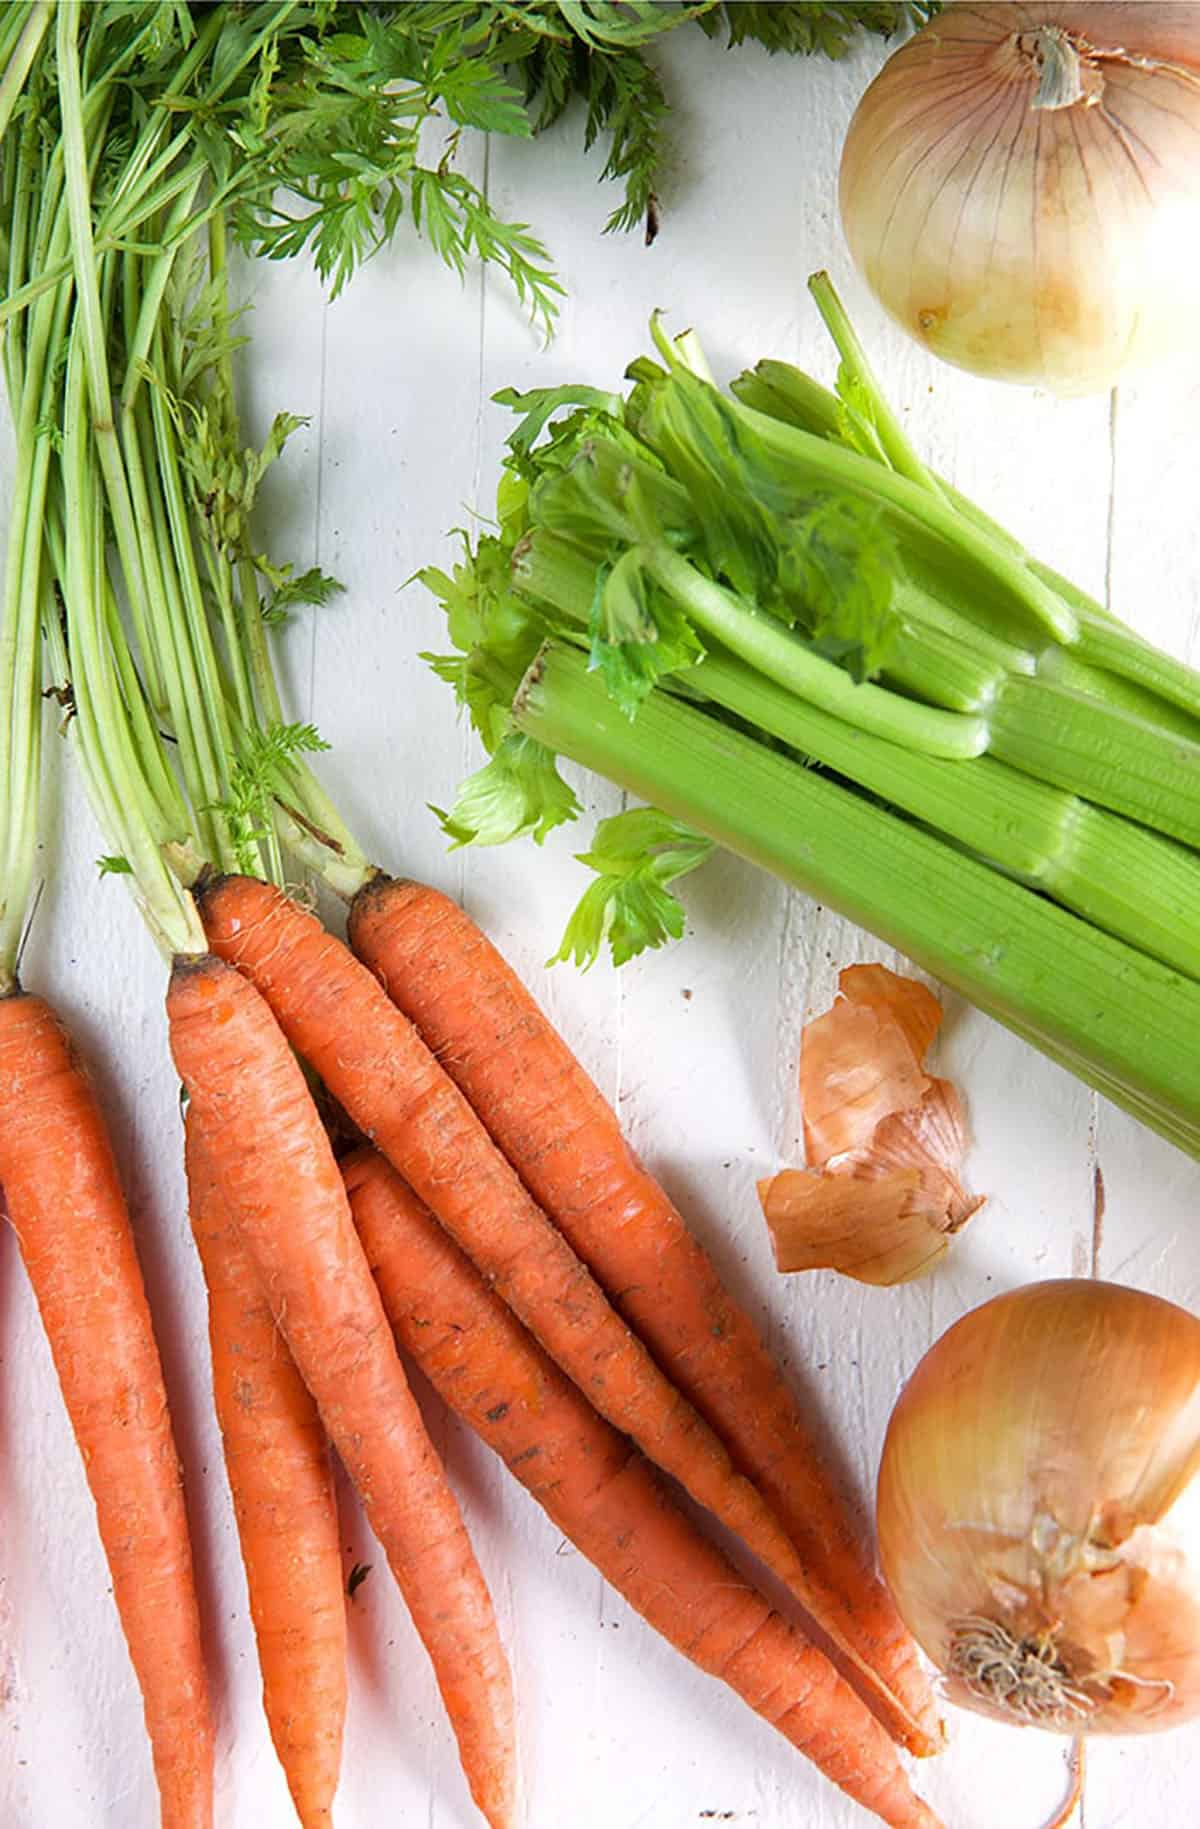 Onions, celery and carrots are being stirred in a large skillet with a wooden spoon.